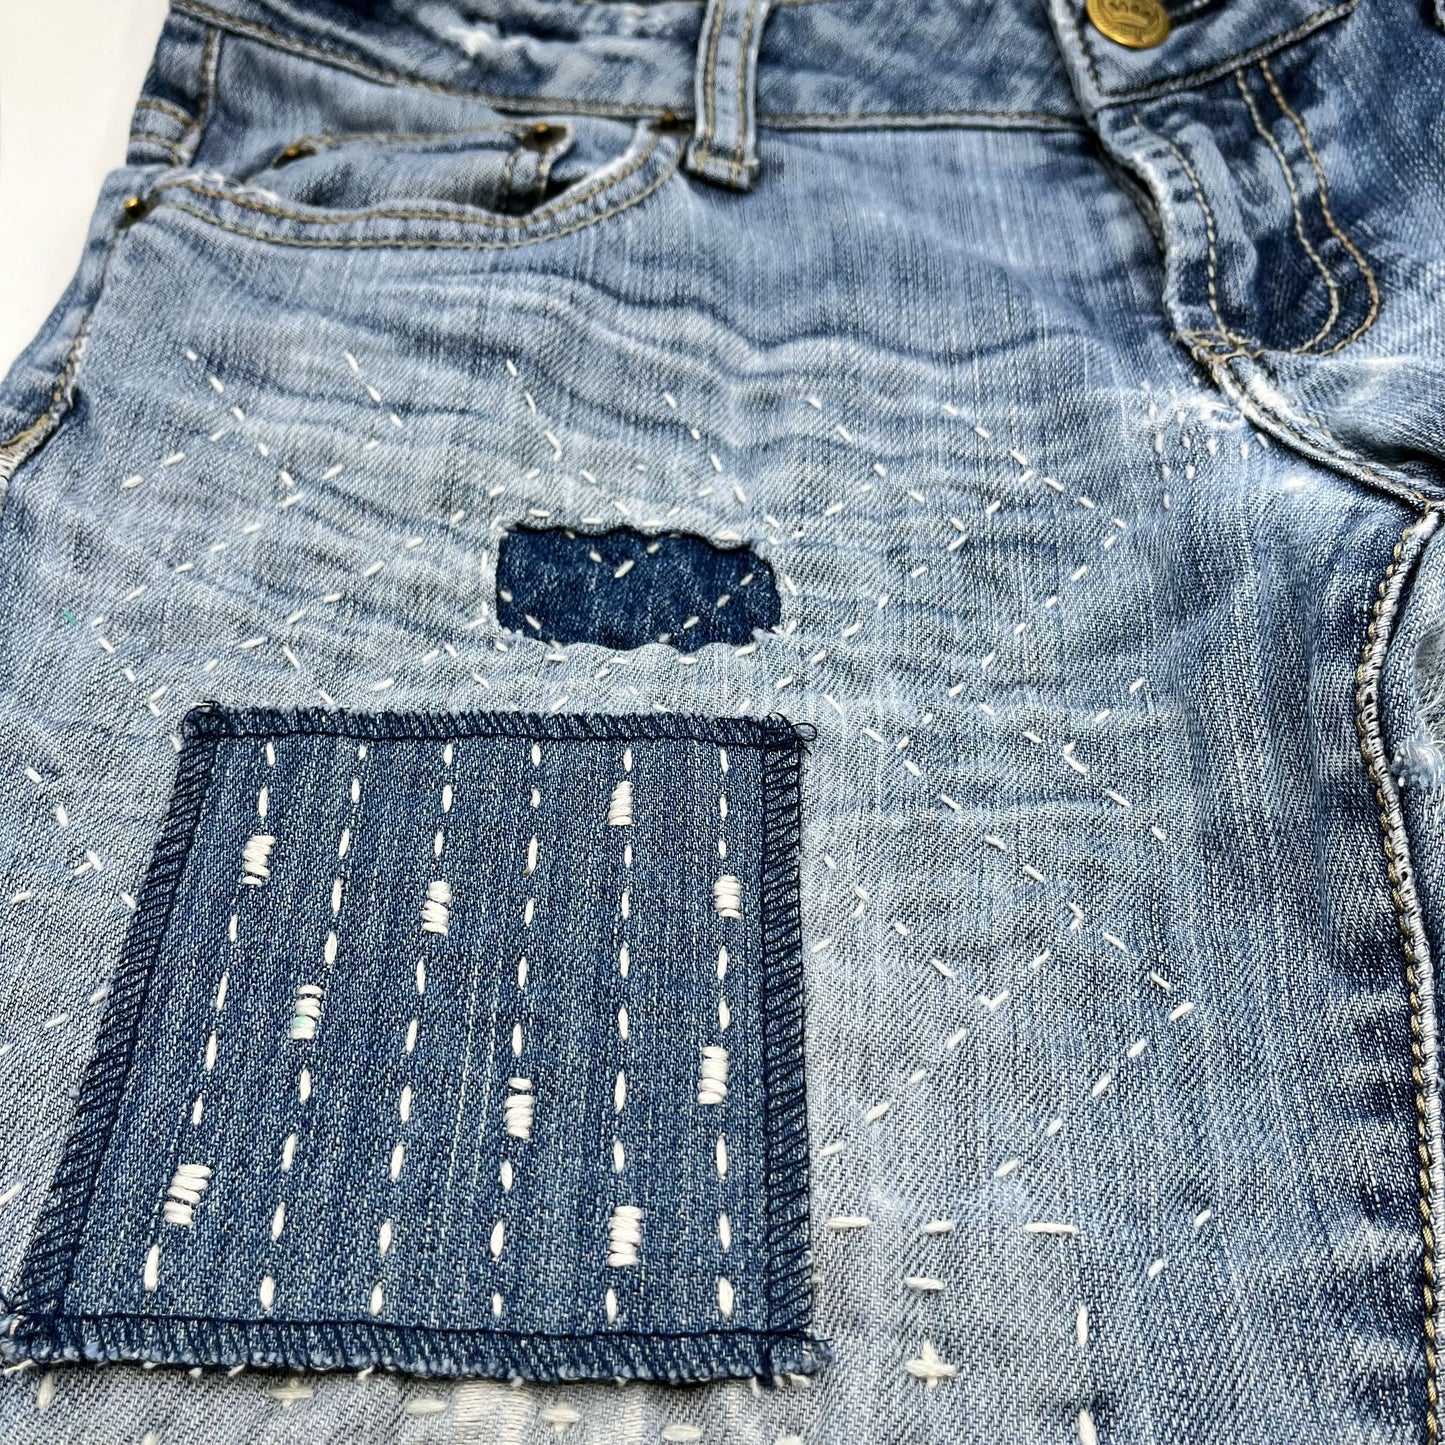 a square patch made out of denim, handstitched with ivory running stitches with randomly placed small rectangles made of stitches running the other direction, on a pair of jeans with other visible mends